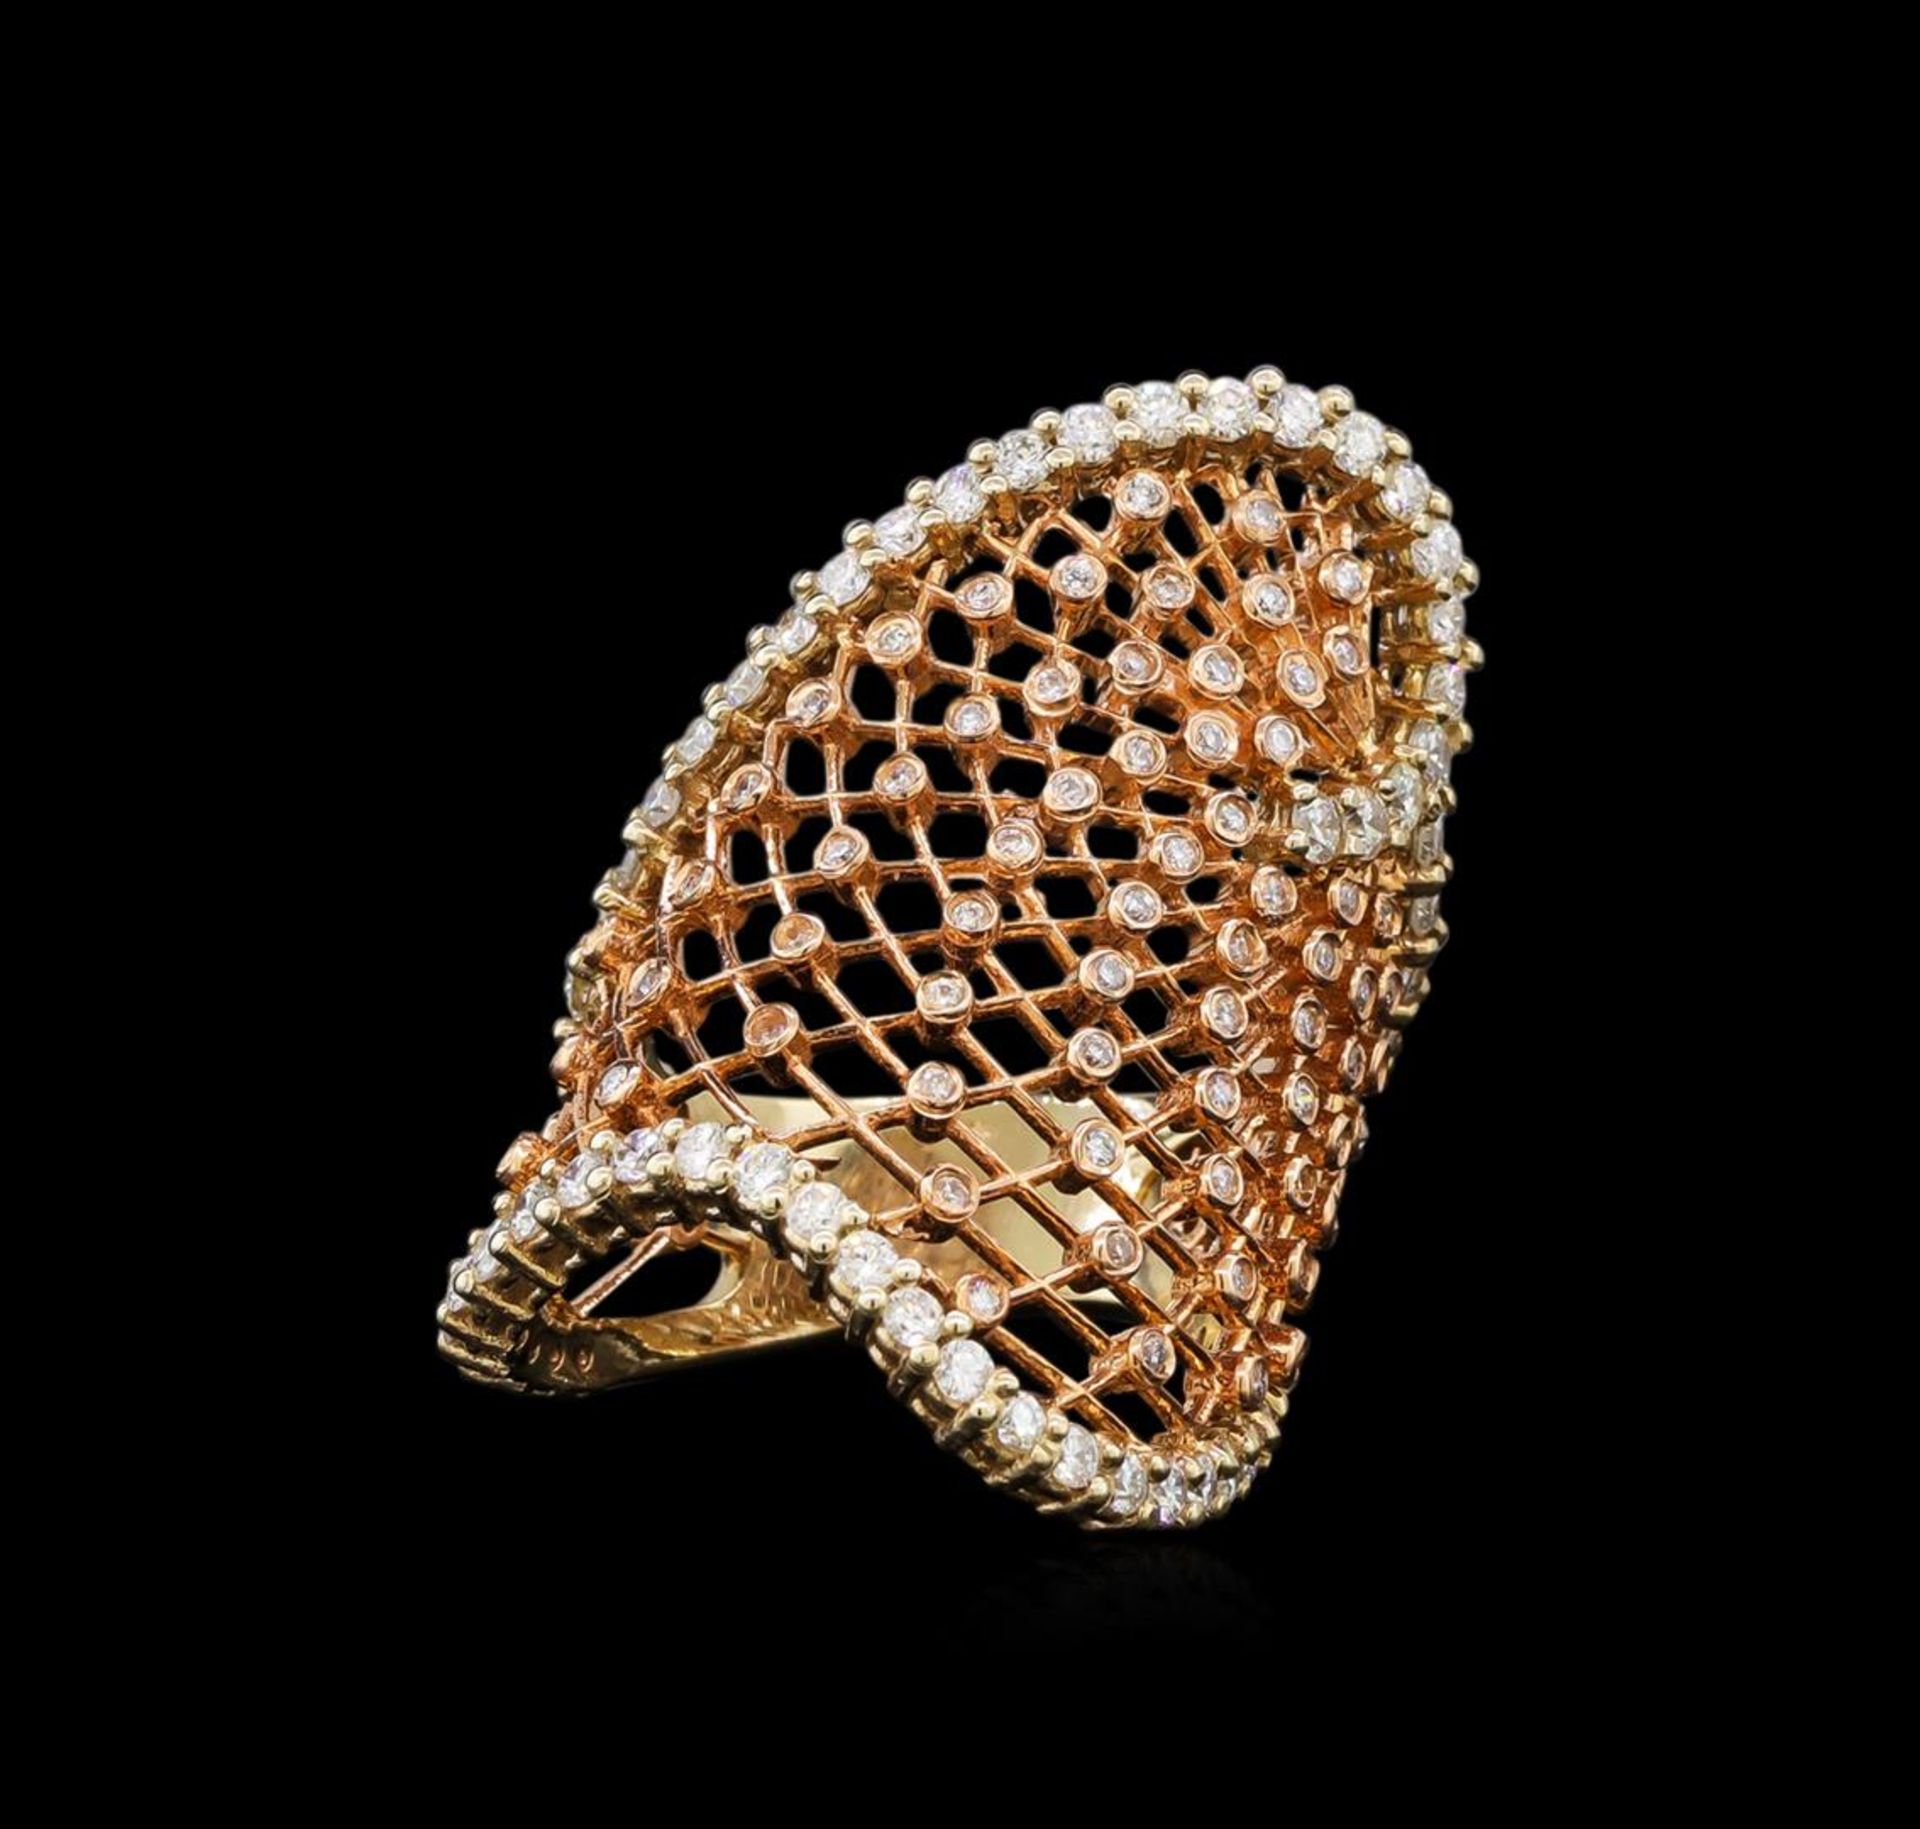 14KT Two-Tone Gold 1.63 ctw Diamond Ring - Image 2 of 5